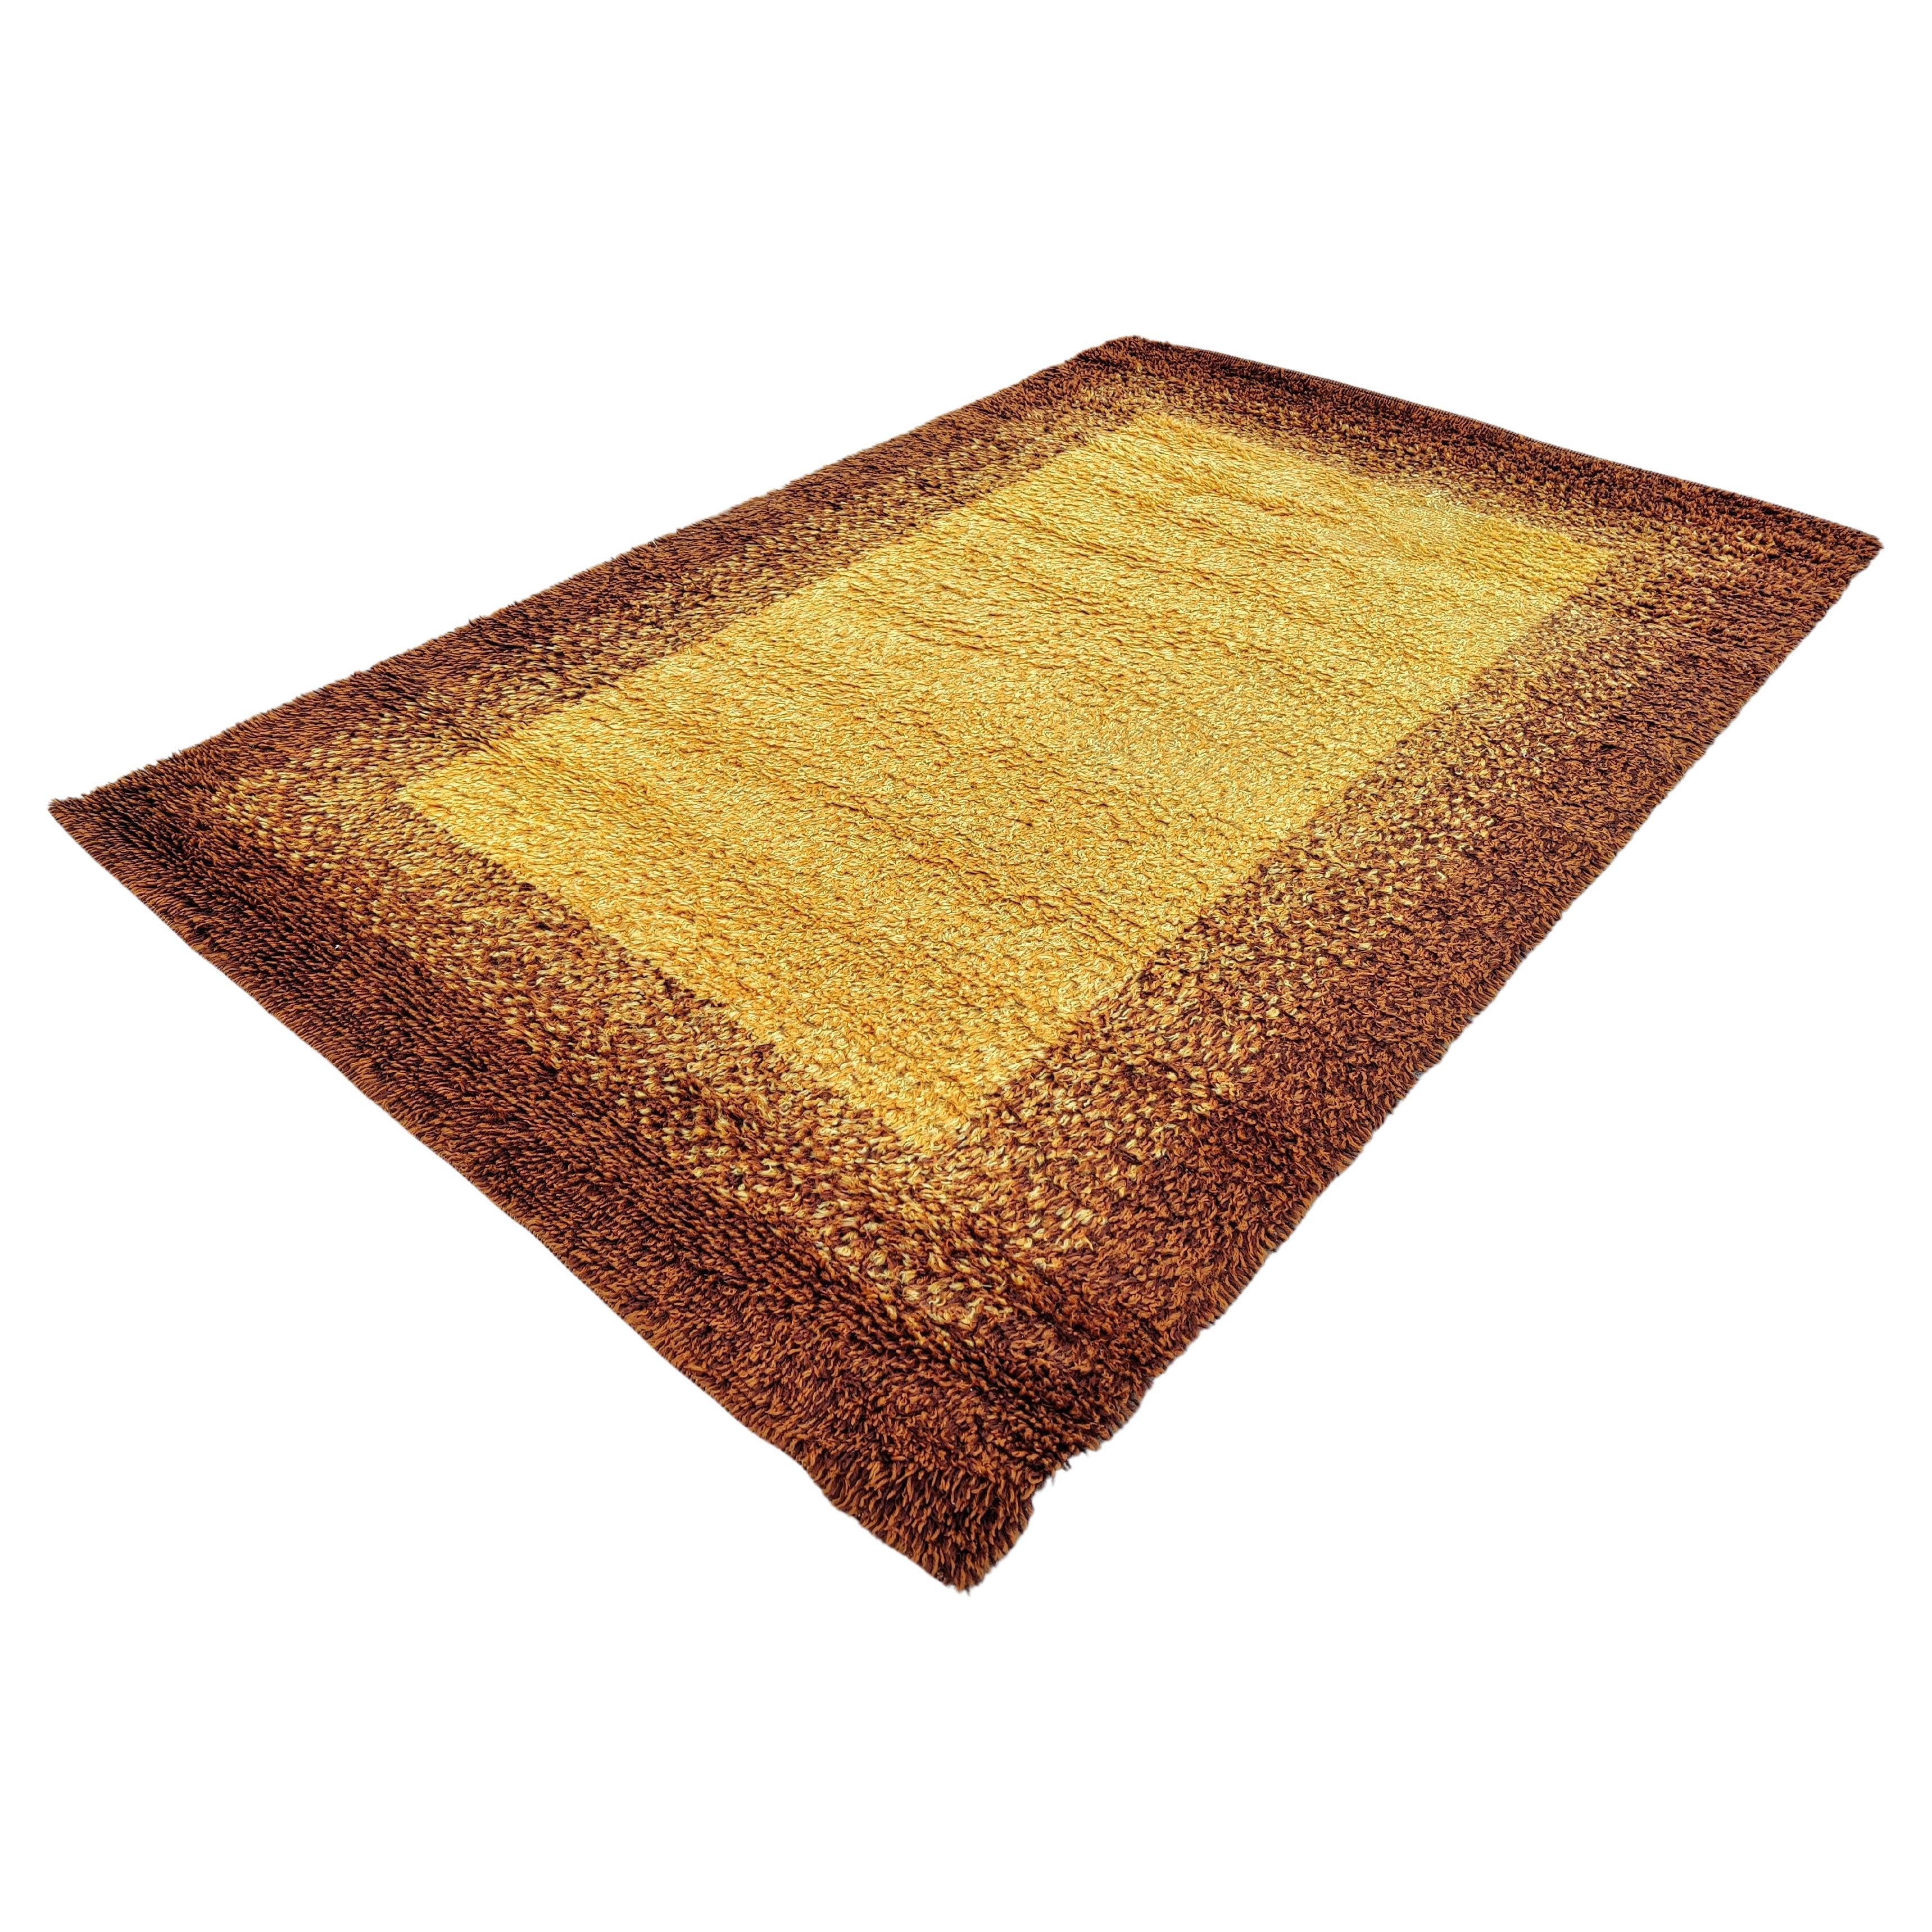 Hand Tufted Woolen Mid Century Modern Rug by Teppich Siegel, West Germany 1970s For Sale